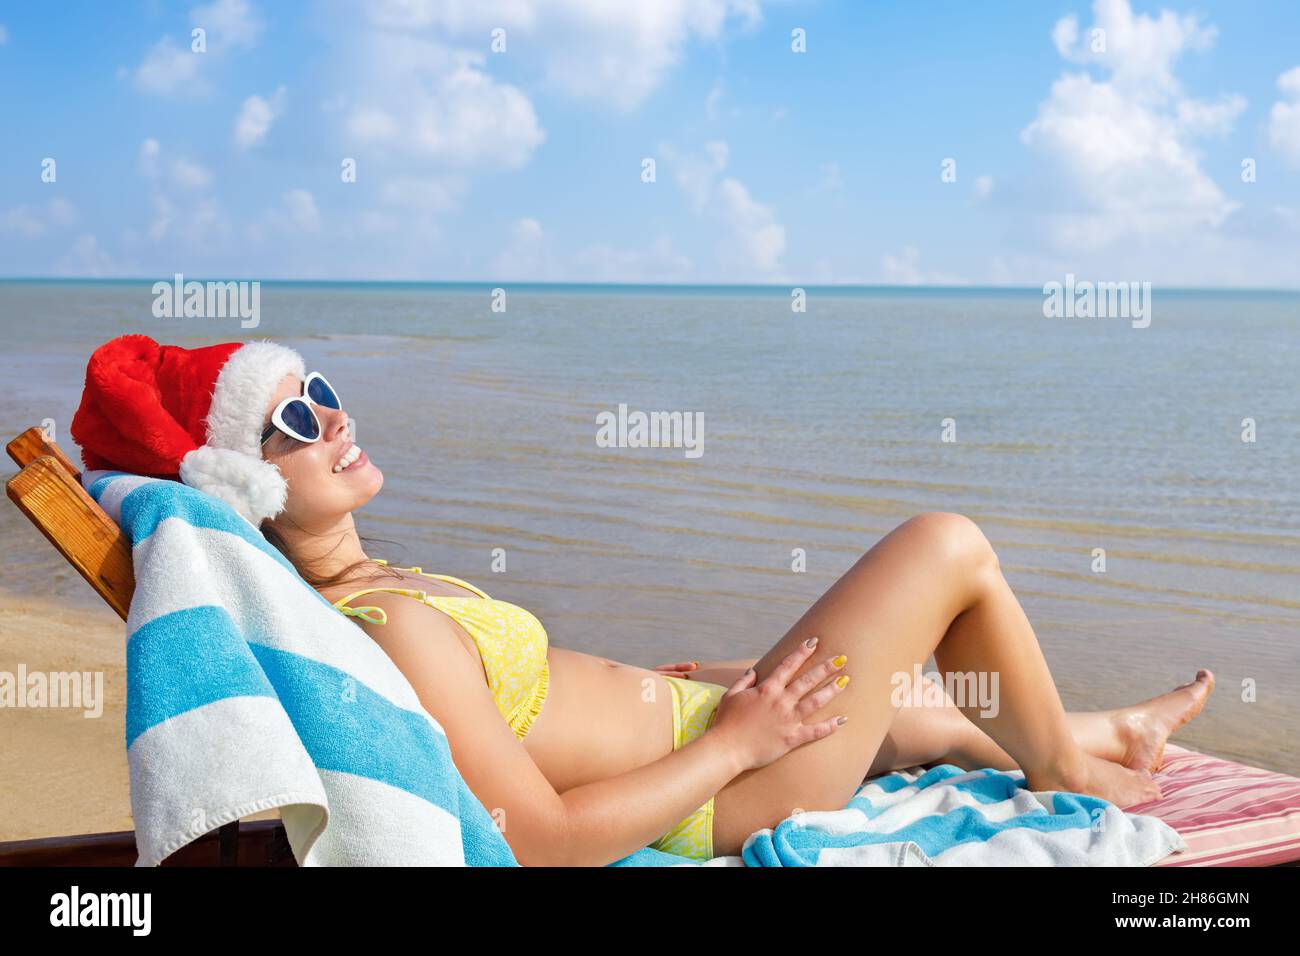 beautiful young woman in santa hat and sunglasses relaxing on sun lounger Stock Photo